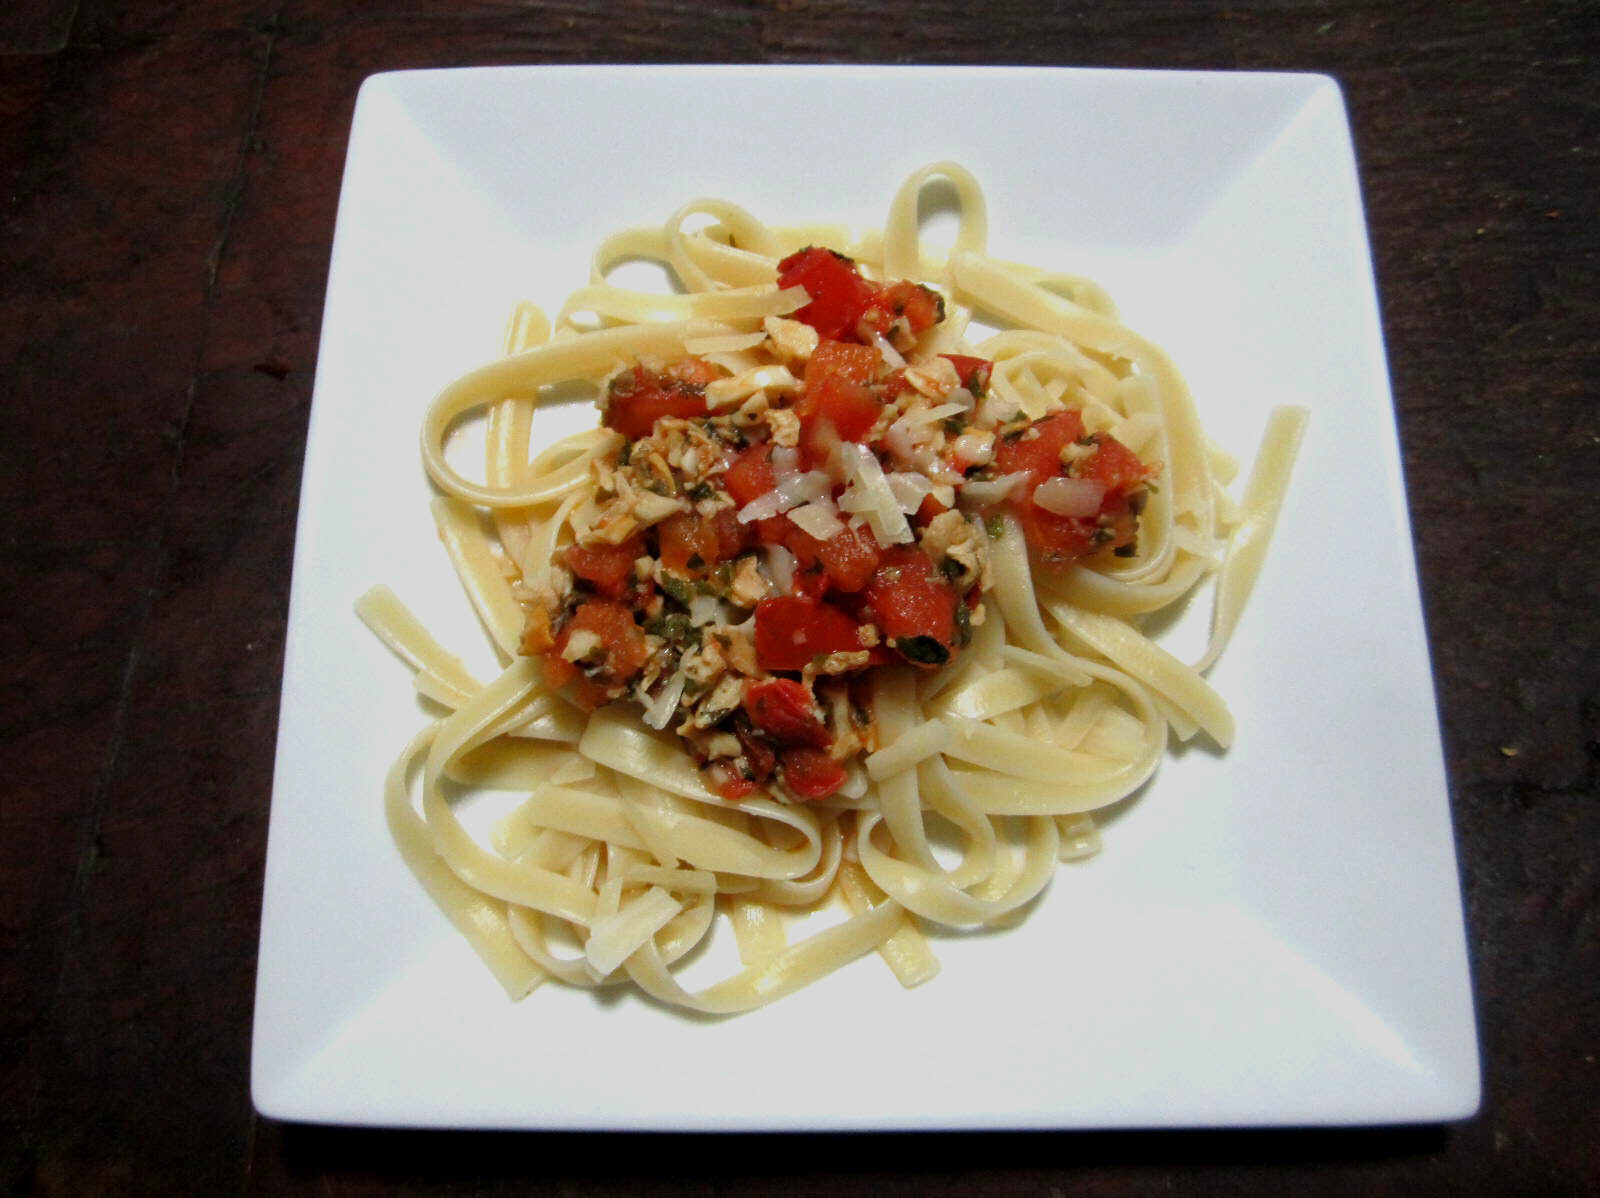 Pasta with red clam sauce